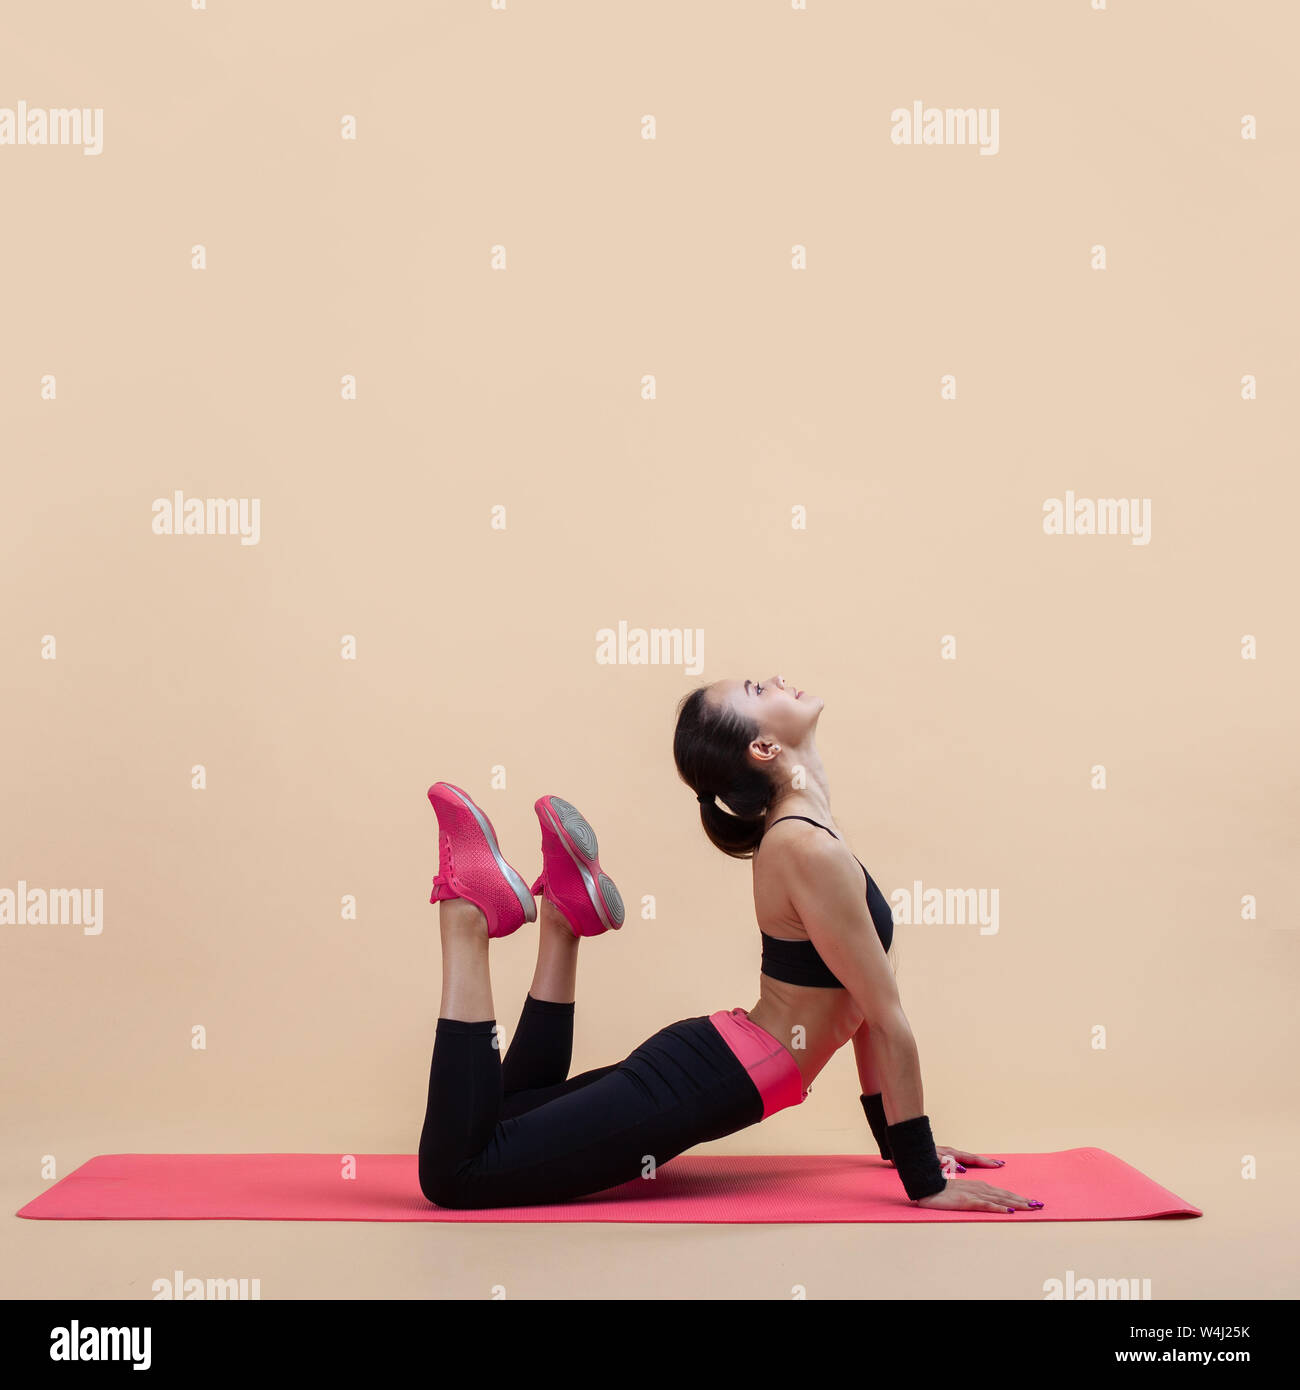 A young attractive girl with a ponytail, a brunette, is lies in a cobra pose with knees bent, doing stretching on a pink yoga mat, on a pink backgroun Stock Photo